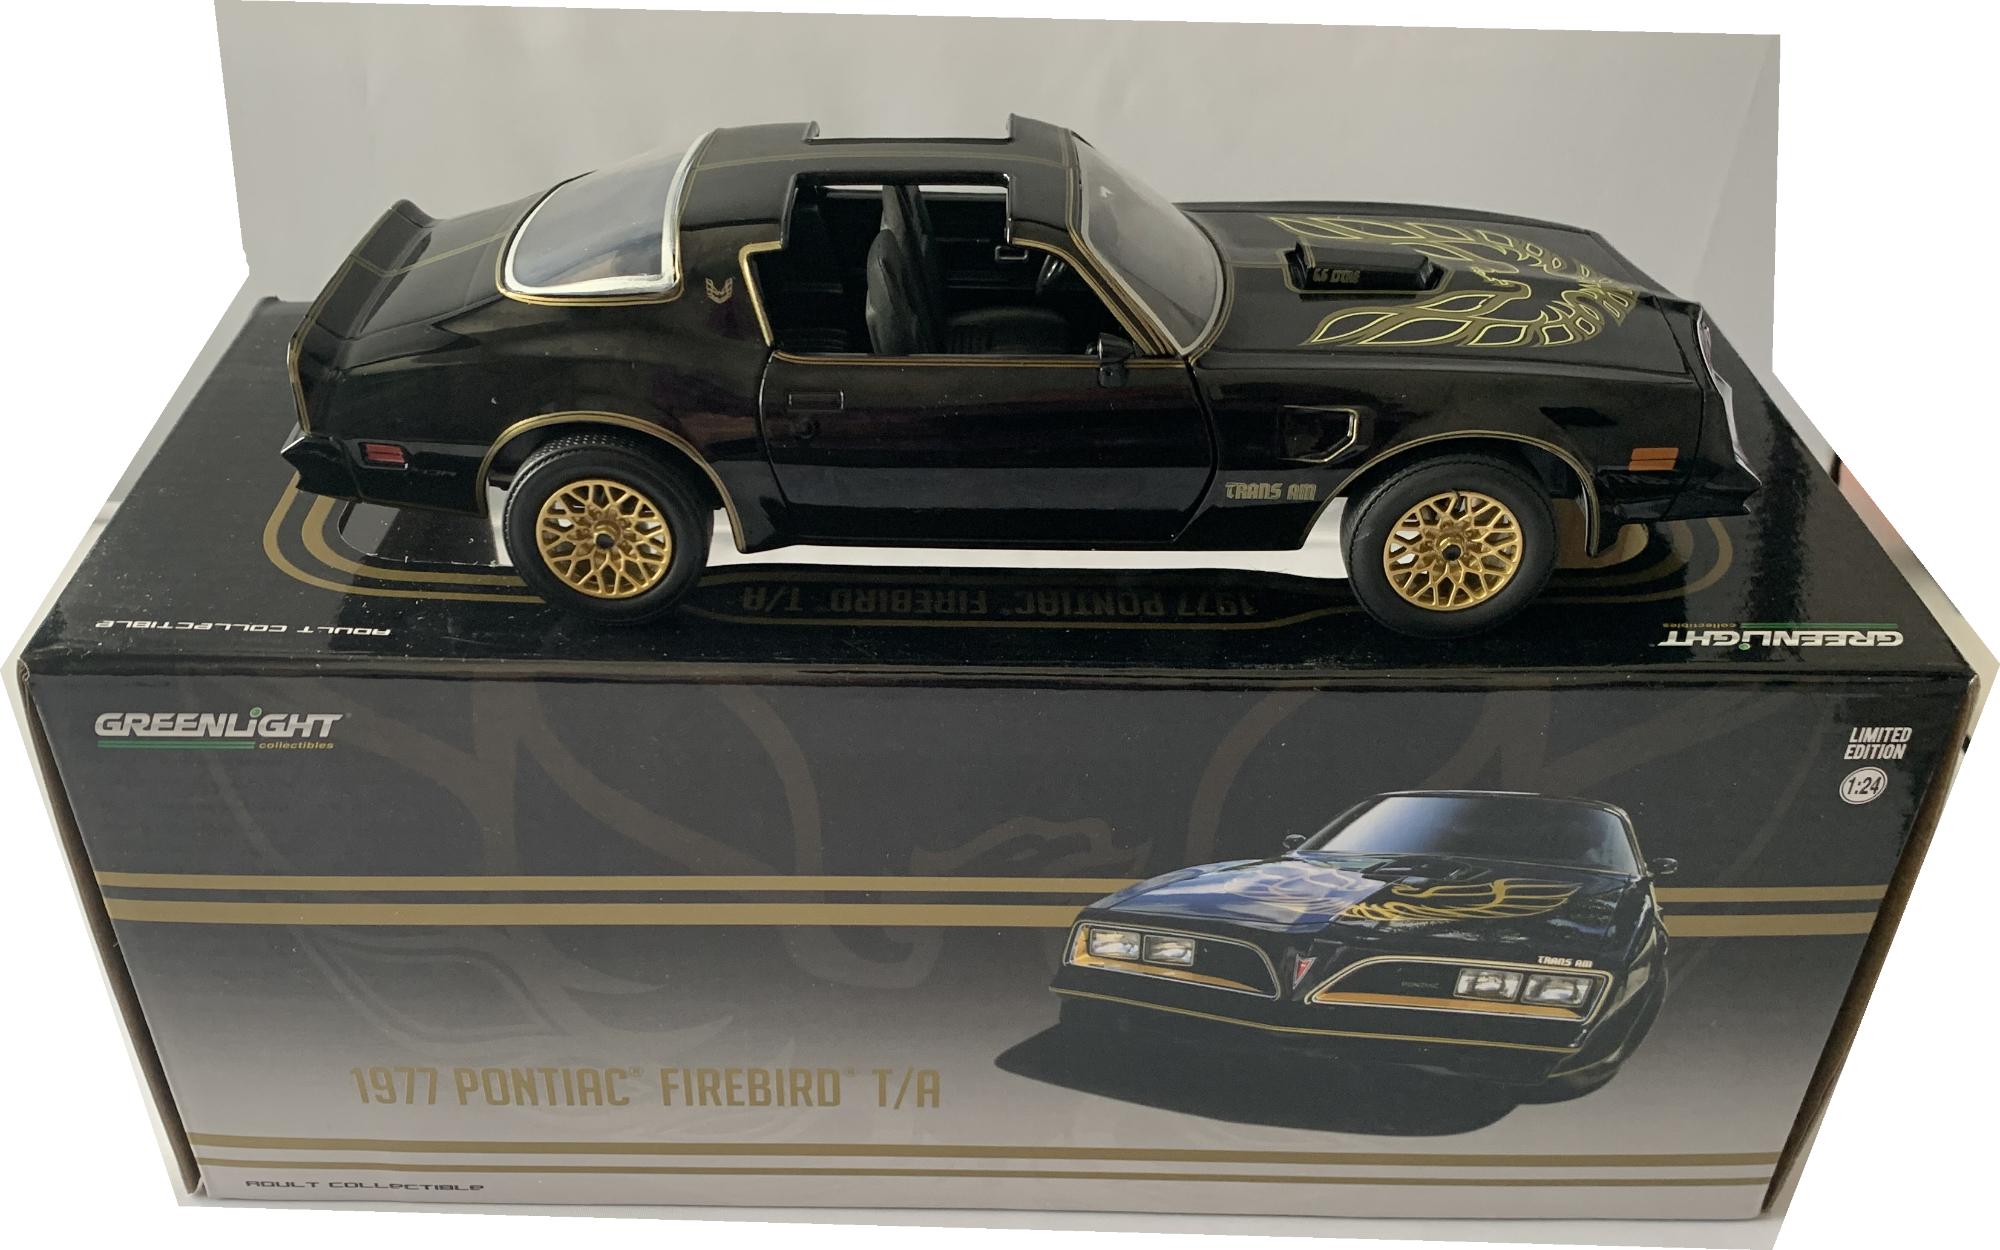 An excellent scale model of a Pontiac Firebird Trans Am decorated in black with authentic graphics including the eagle superbly replicated on the bonnet and gold wheels.  Other trims are finished in gold, orange and silver.  Features include opening driver and passenger doors with working wheels.